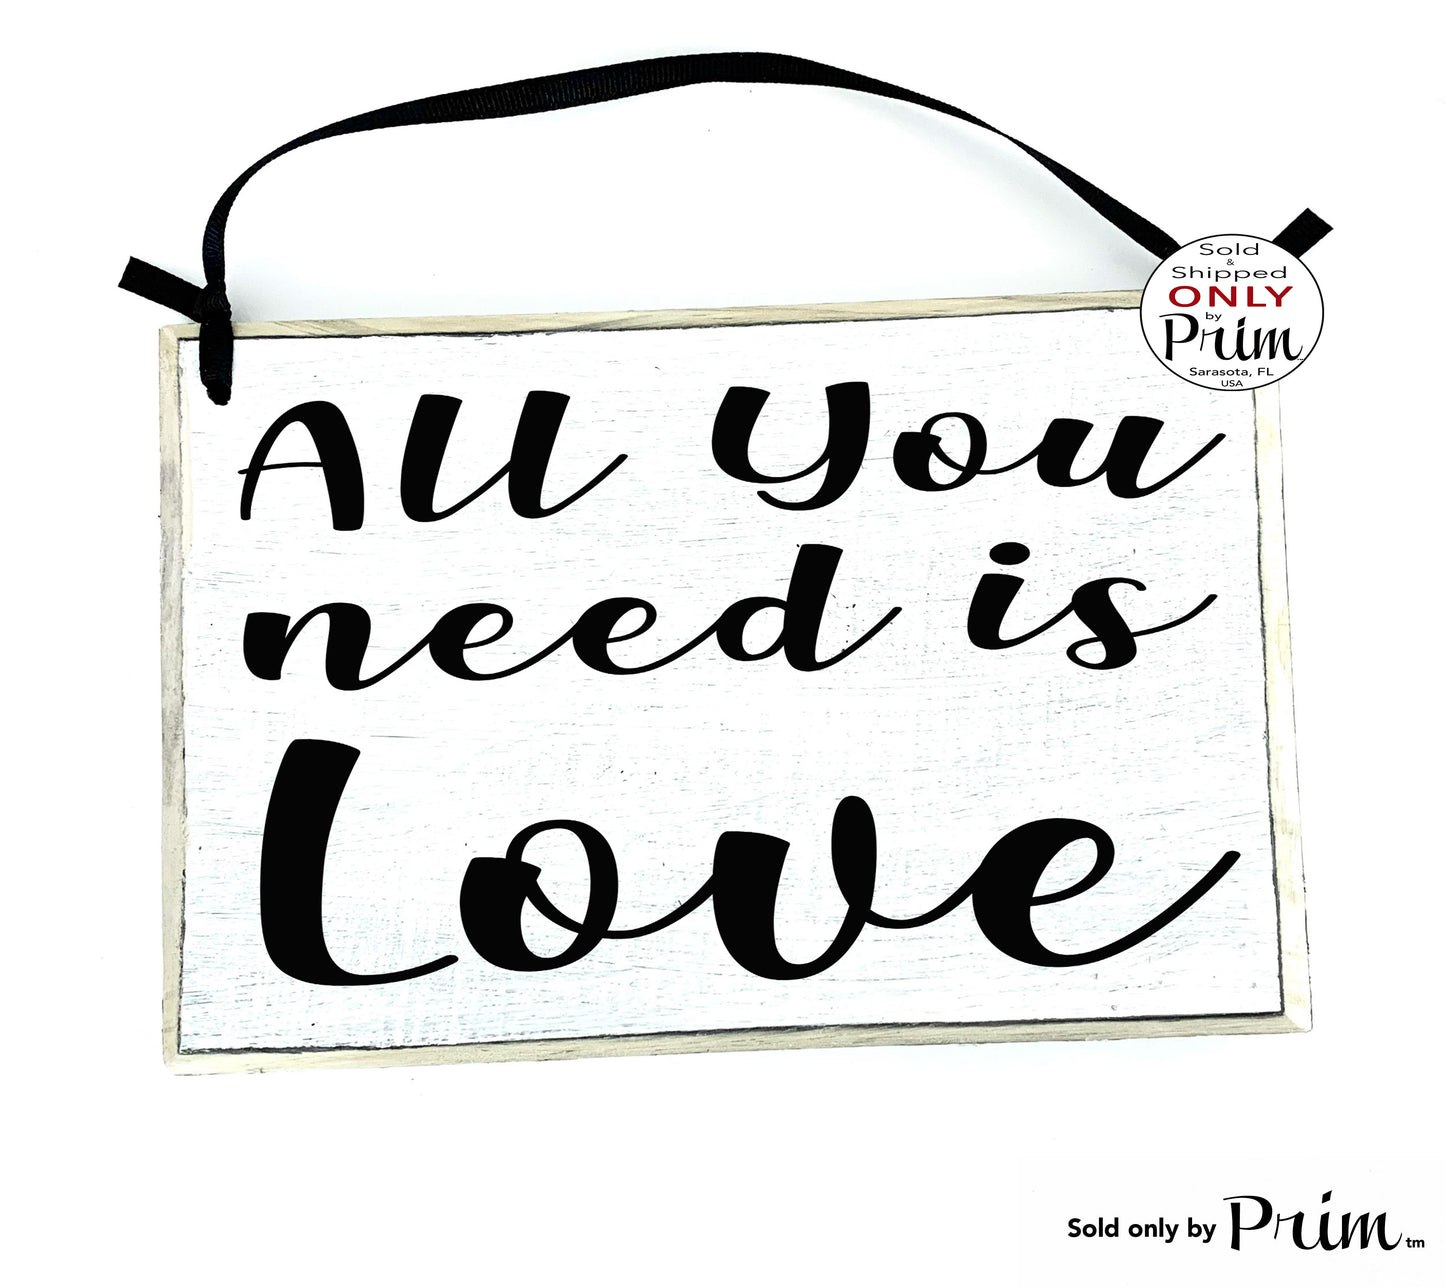 Designs by Prim 8x6 All You Need Is Love Custom Wood Sign Count Your Blessings Blessed Cherish Thankful Happiness Inspirational Motivational  Plaque